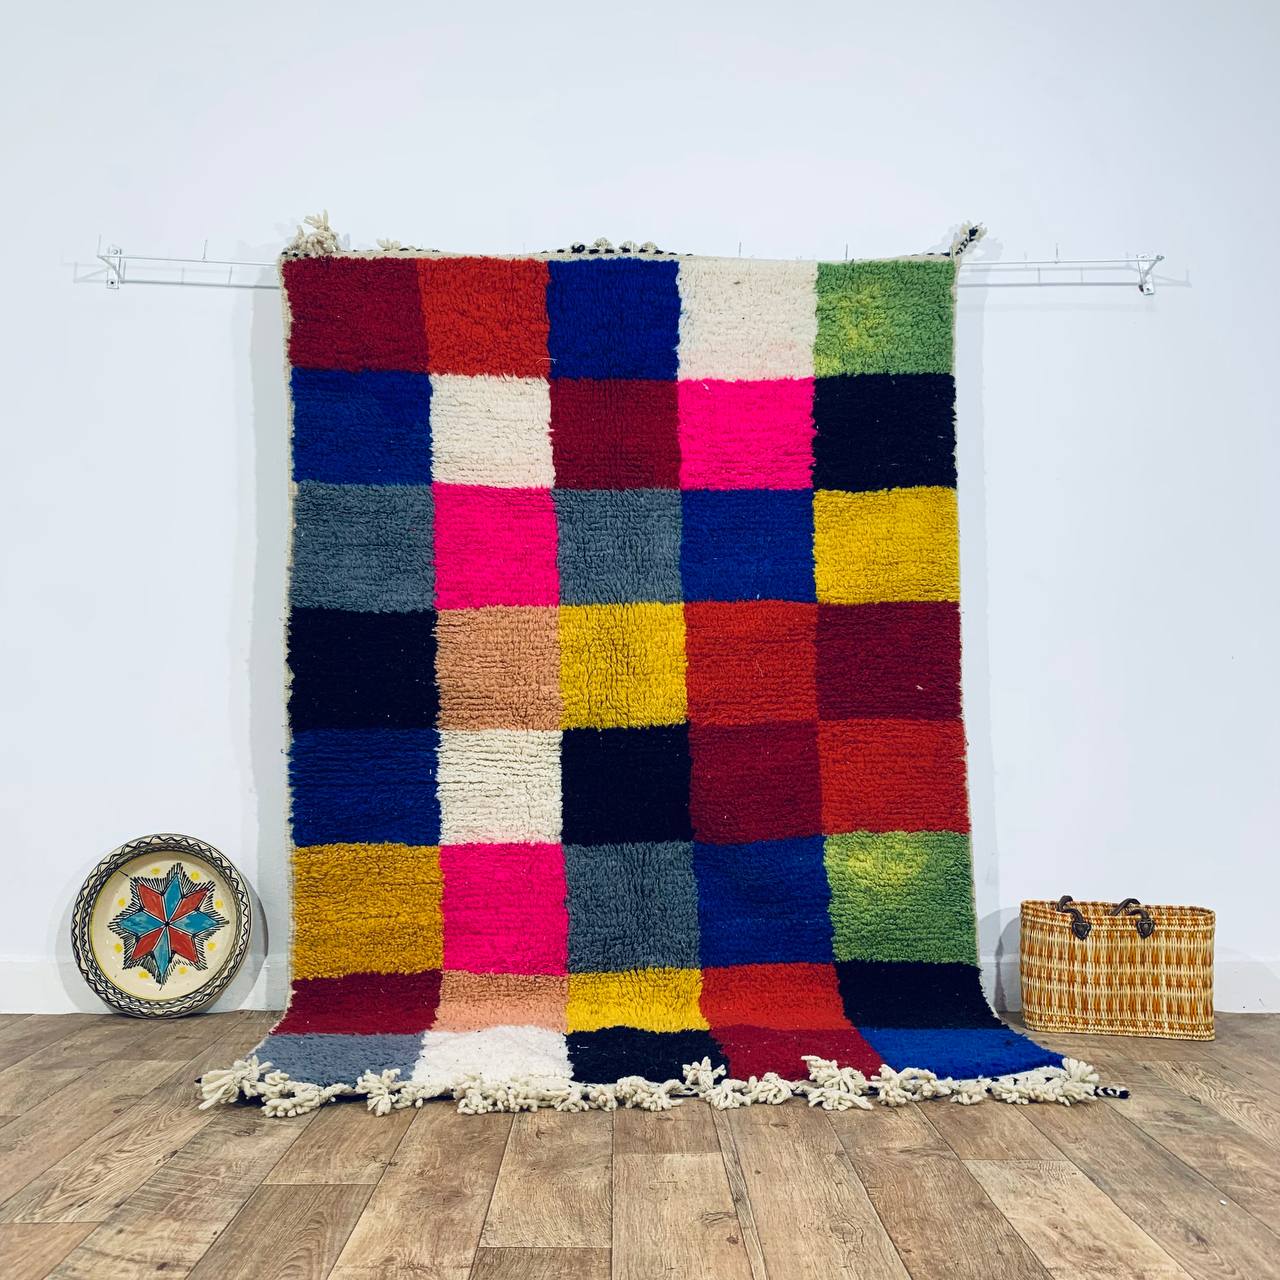 Multicolored Handmade Rug, Multicolor Checkered Rug - Berber style wool rug from Morocco - Modern rug